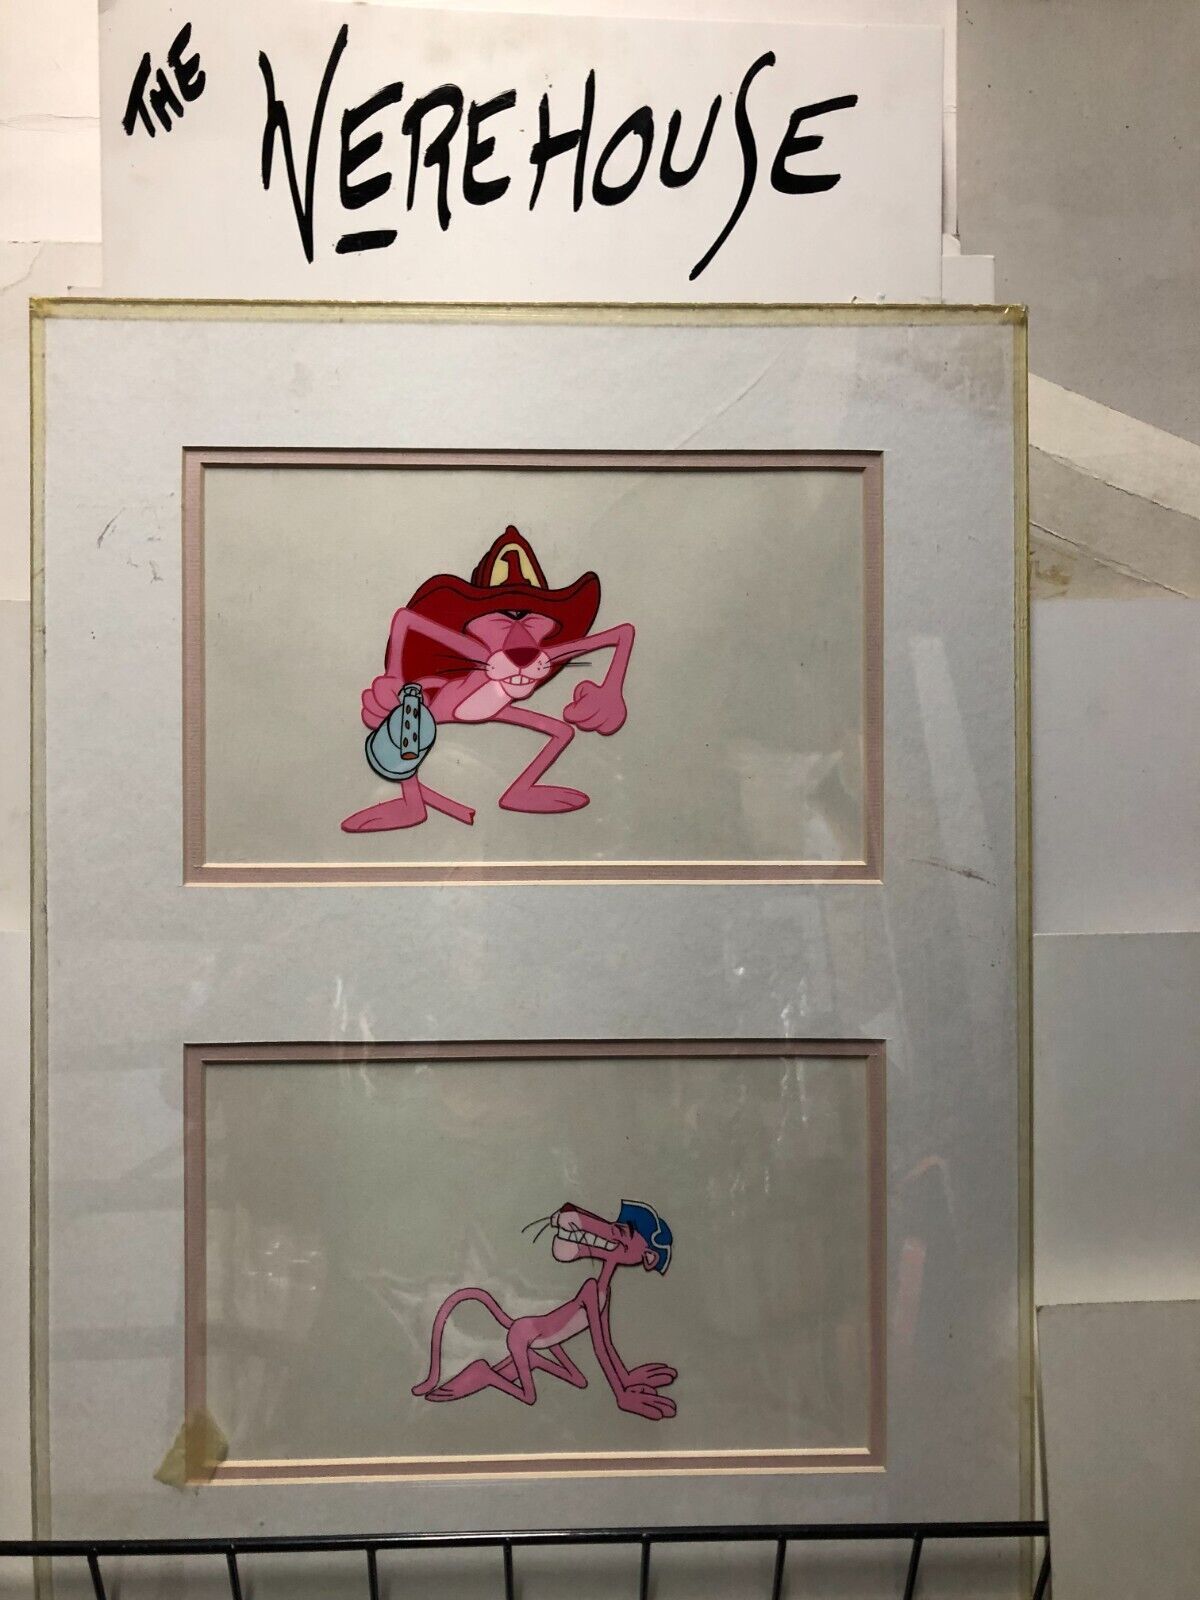 PINK PANTHER  double header - two matted animation cells Hanna Barbera classic